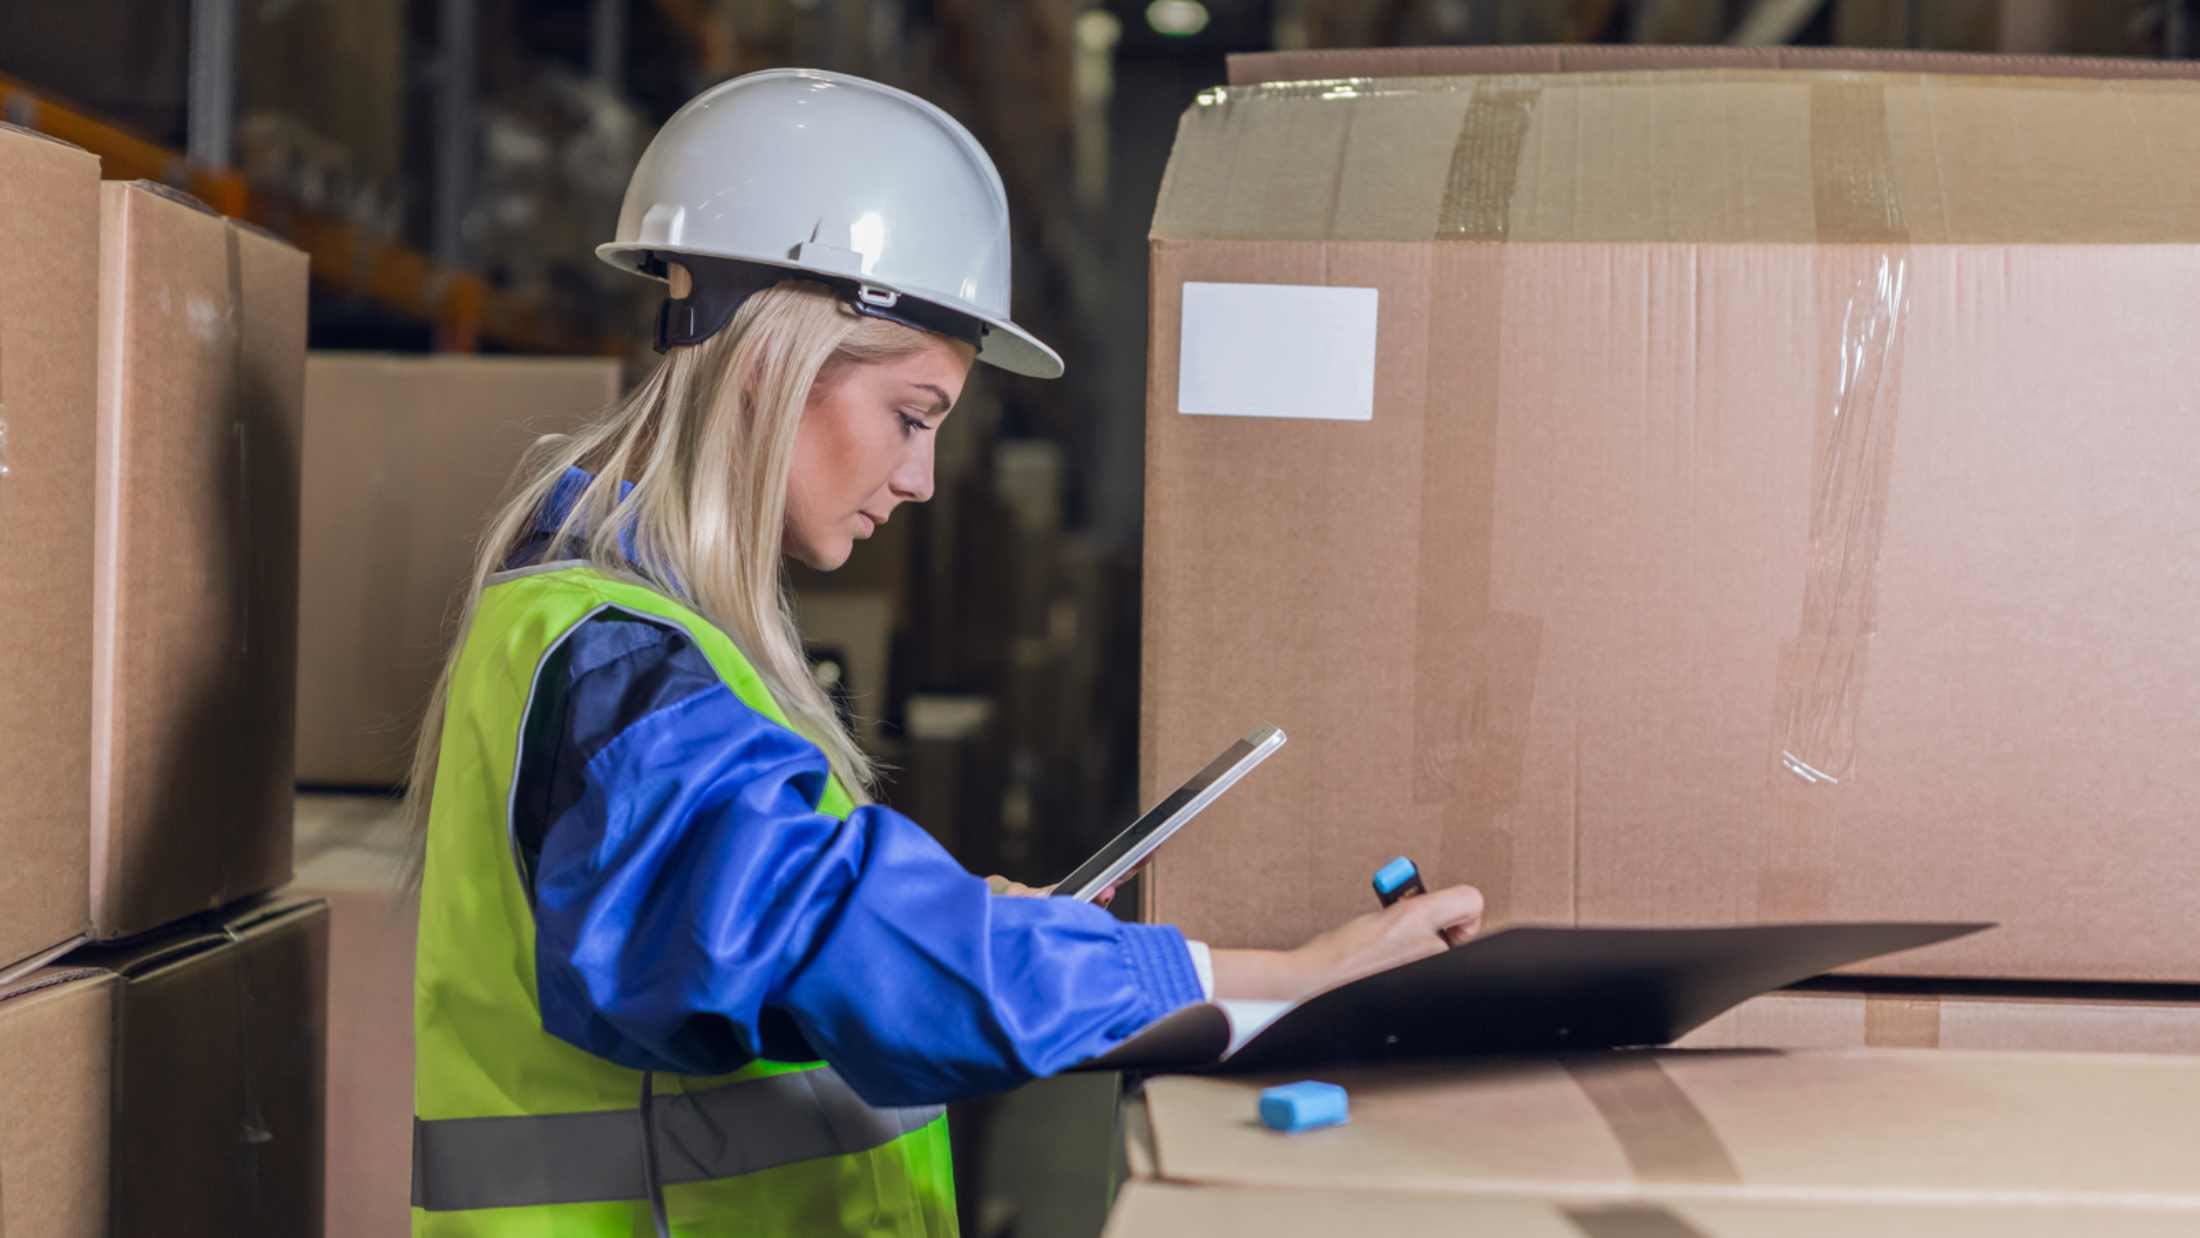 Woman wearing hi-vis jacket and hard hat holding phone and highlighter pen surrounded by cardboard boxes